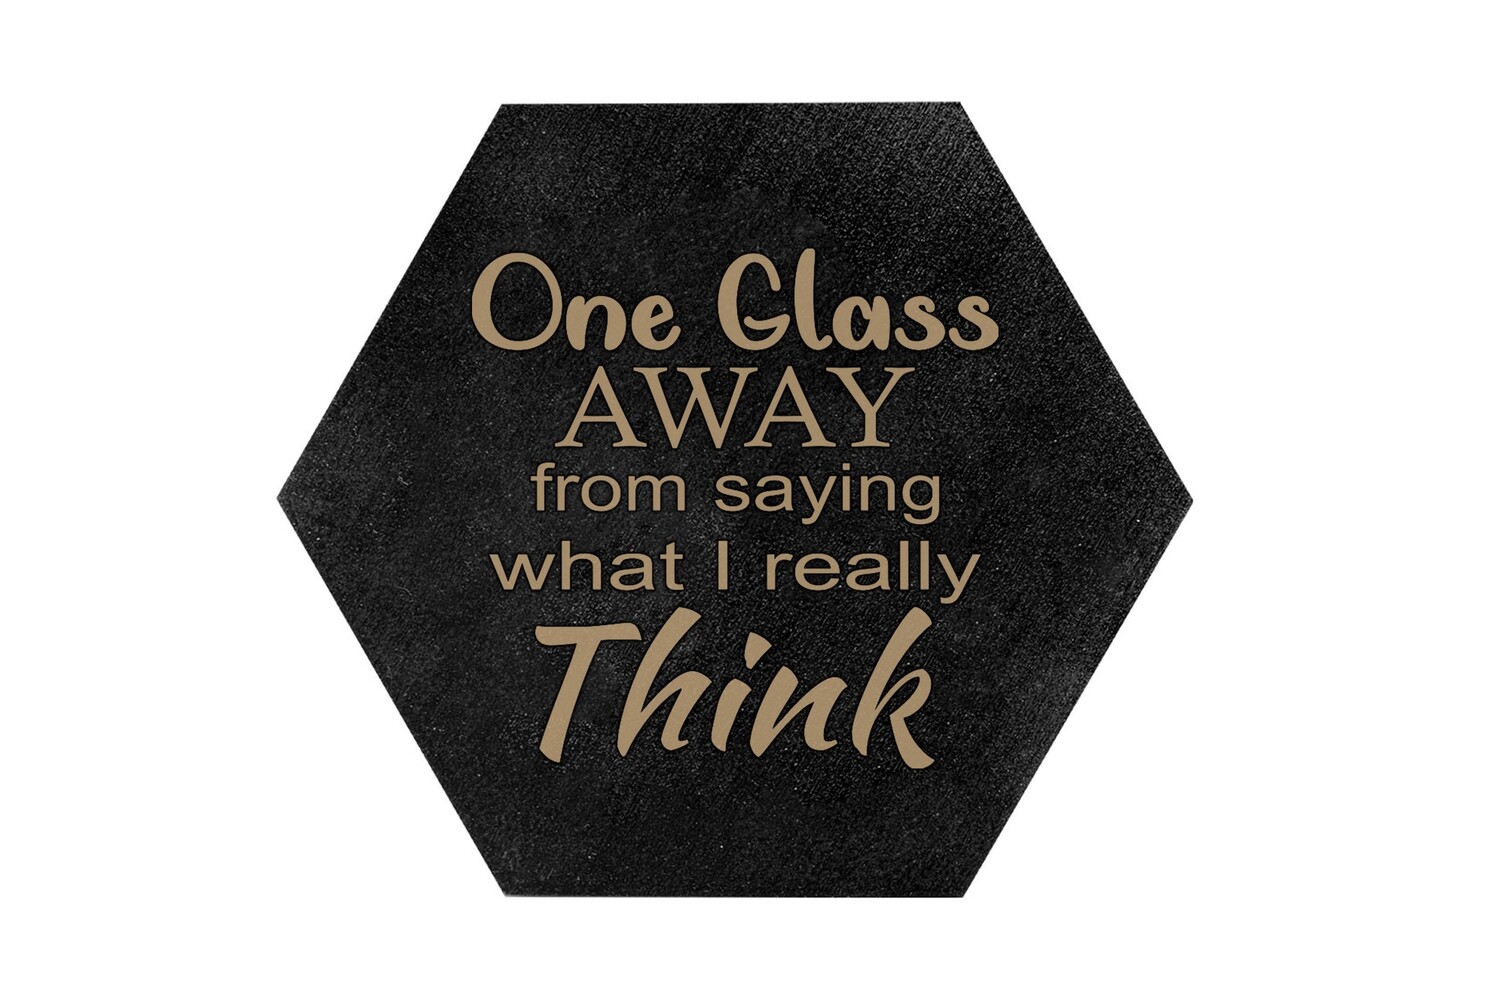 "One Glass Away from saying what I really Think" HEX Hand-Painted Wood Coaster Set